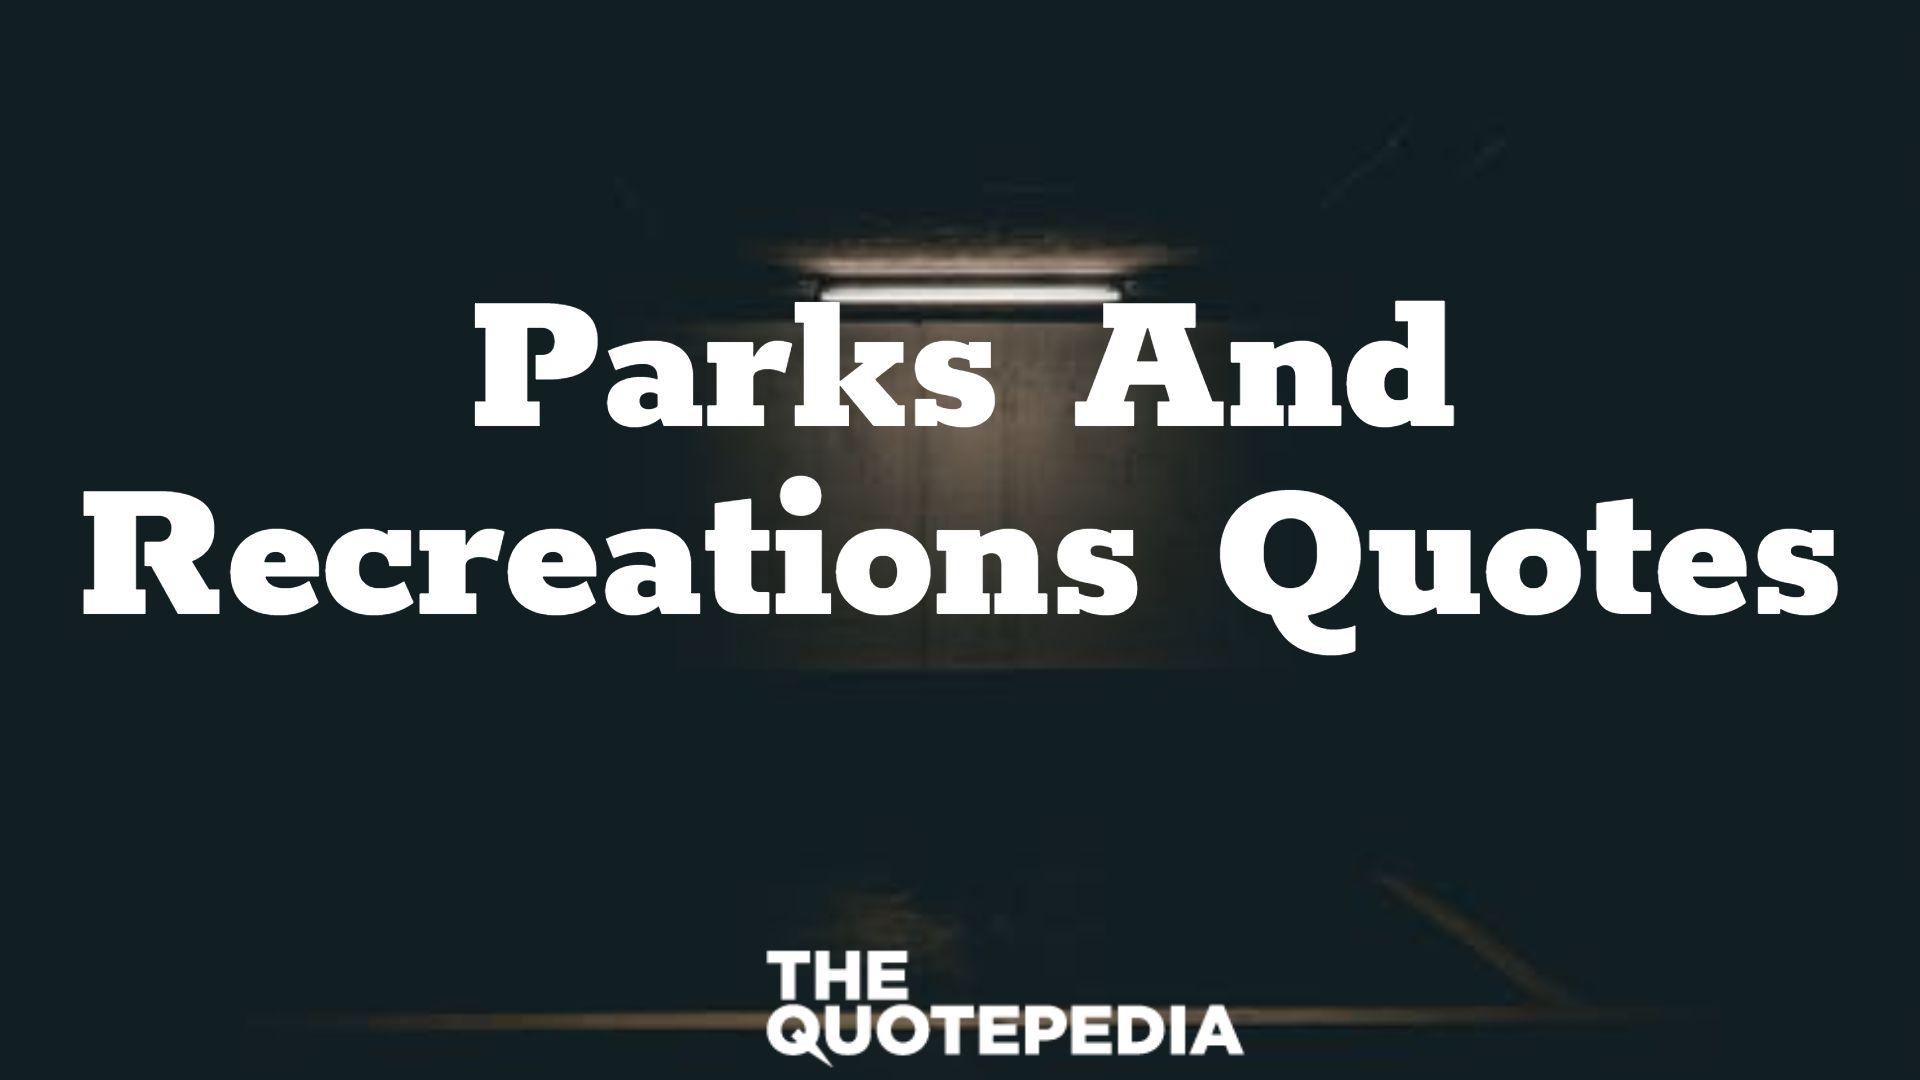 Parks And Recreations Quotes